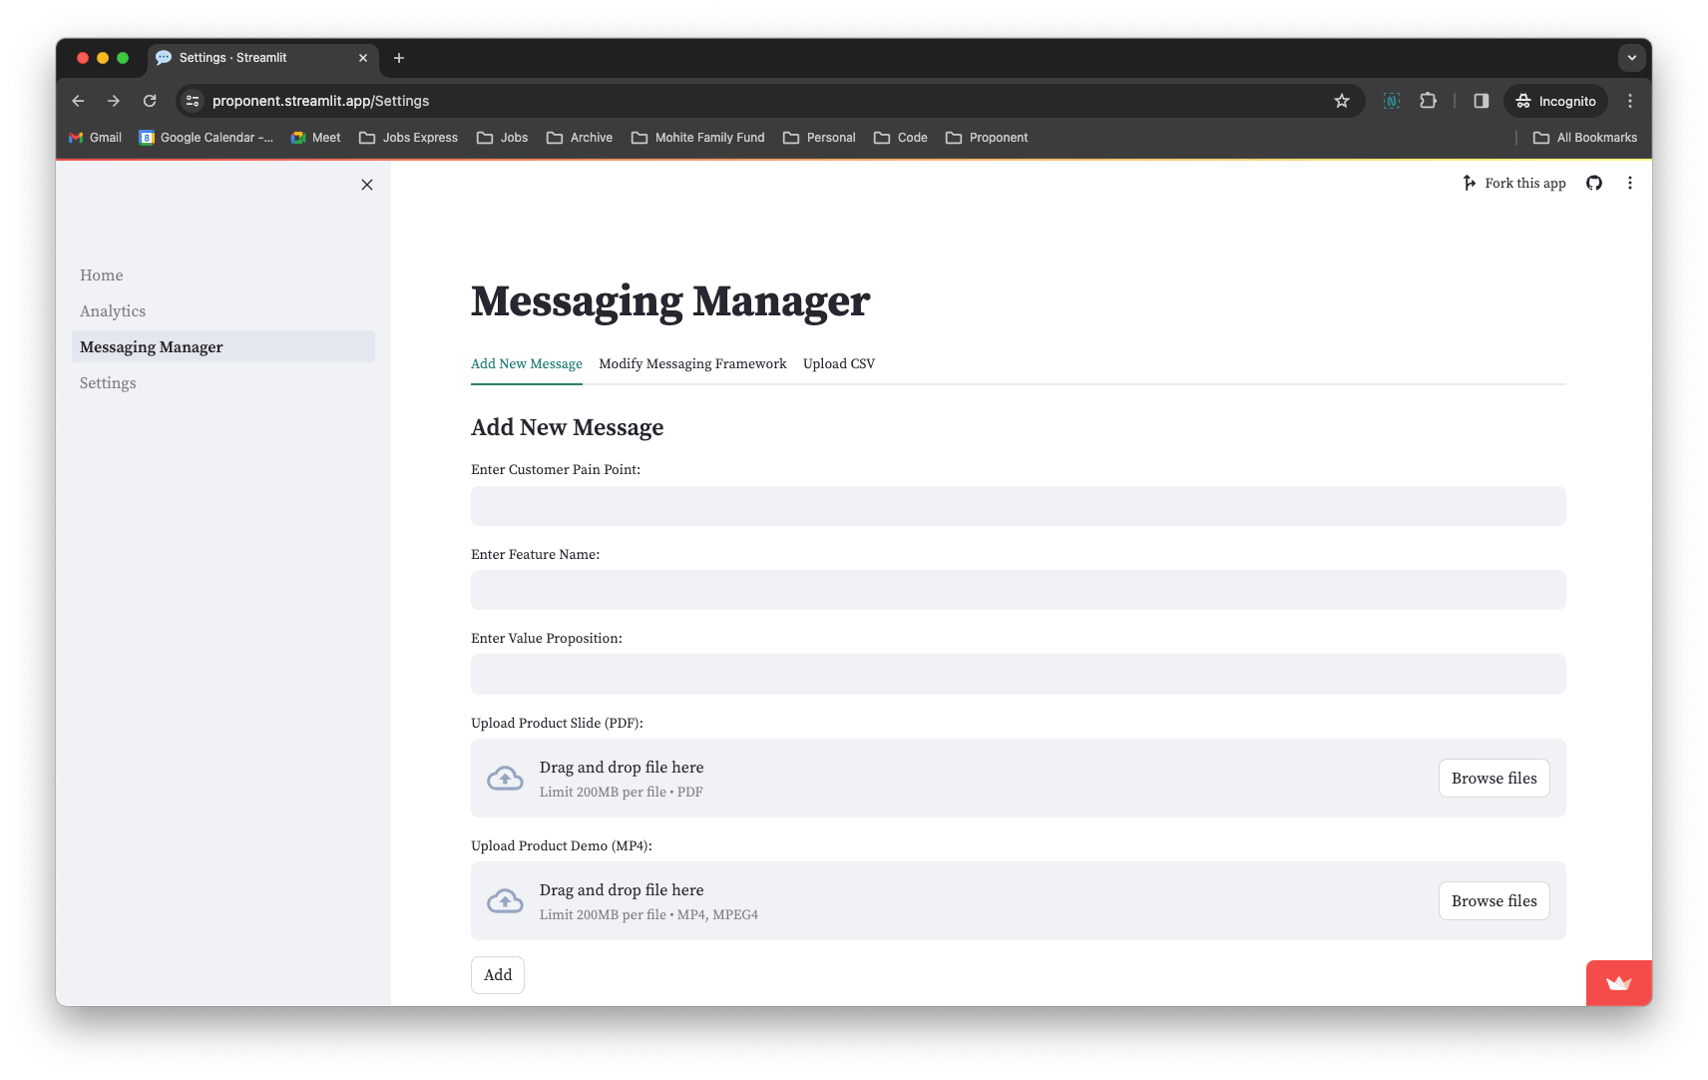 Messaging Manager